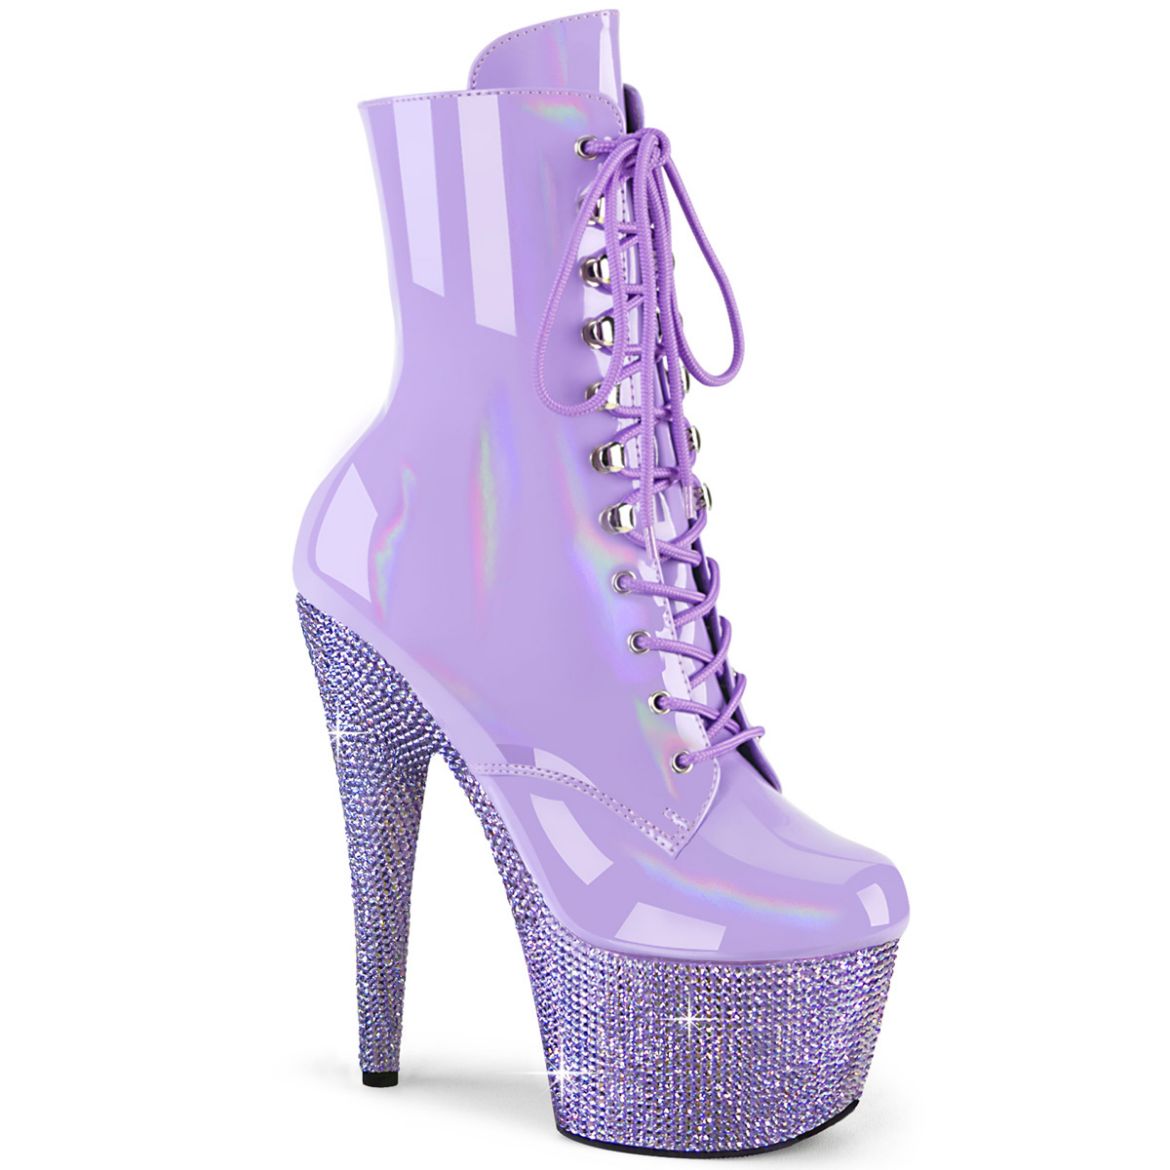 Product image of Pleaser BEJEWELED-1020-7 Lavender Holo Pat/Lavender RS 7 Inch Heel 2 3/4 Inch PF Front Lace-Up Ankle Boot w/RS Side Zip